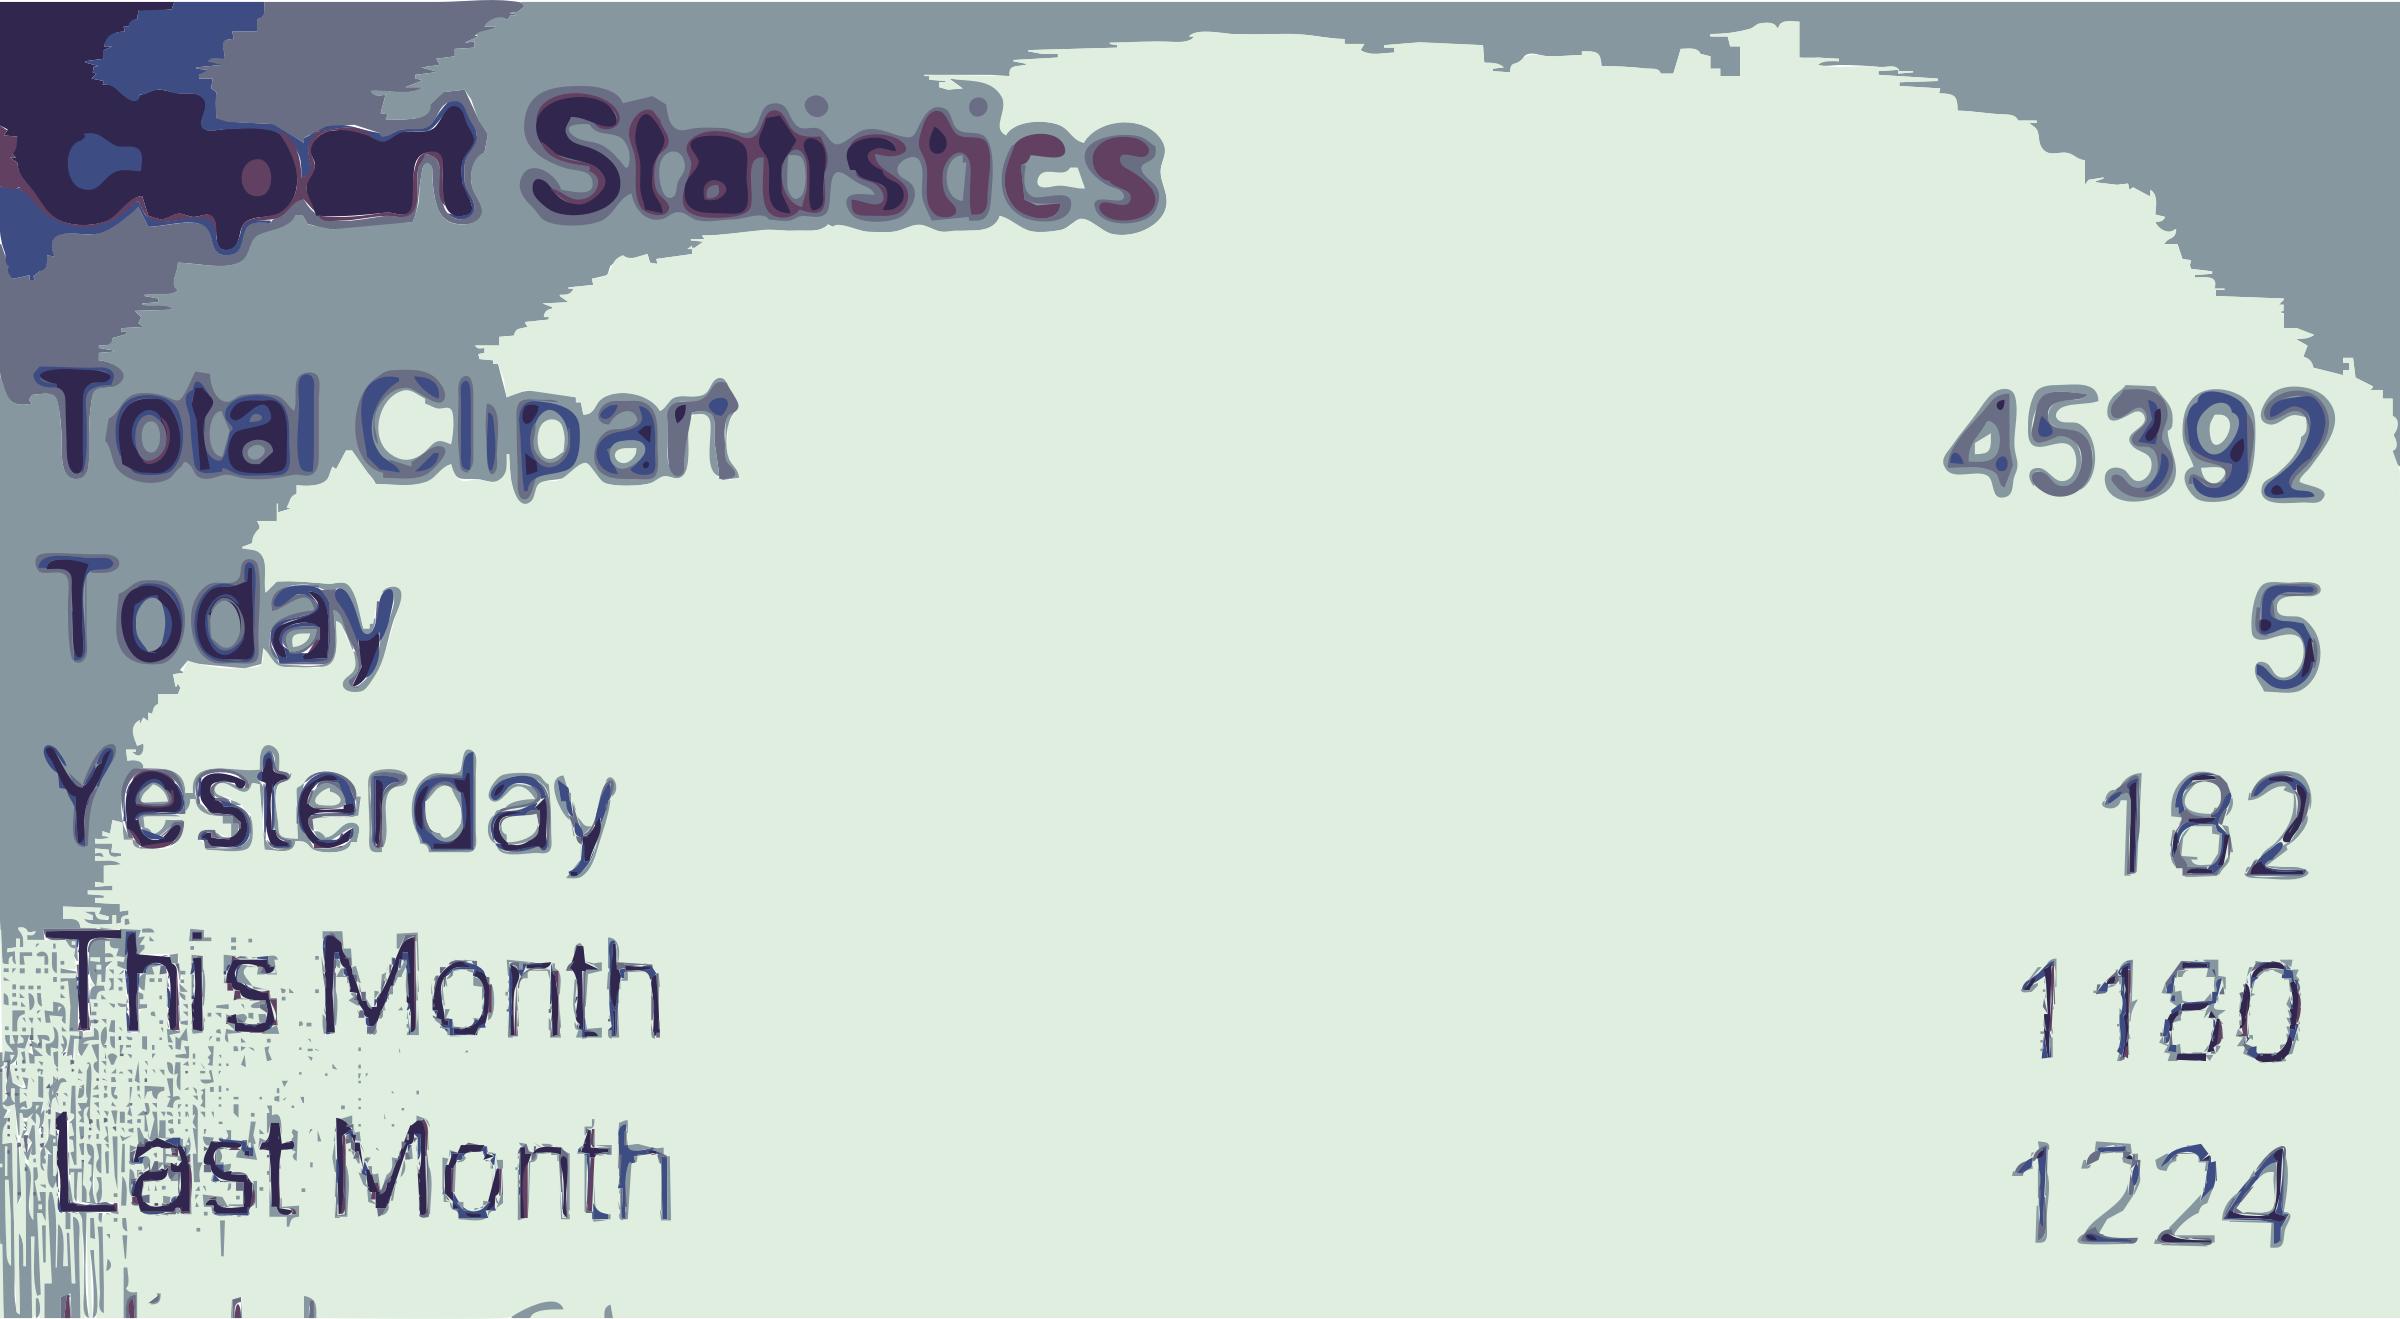 Almost there! share your clipart to beat last month totals png